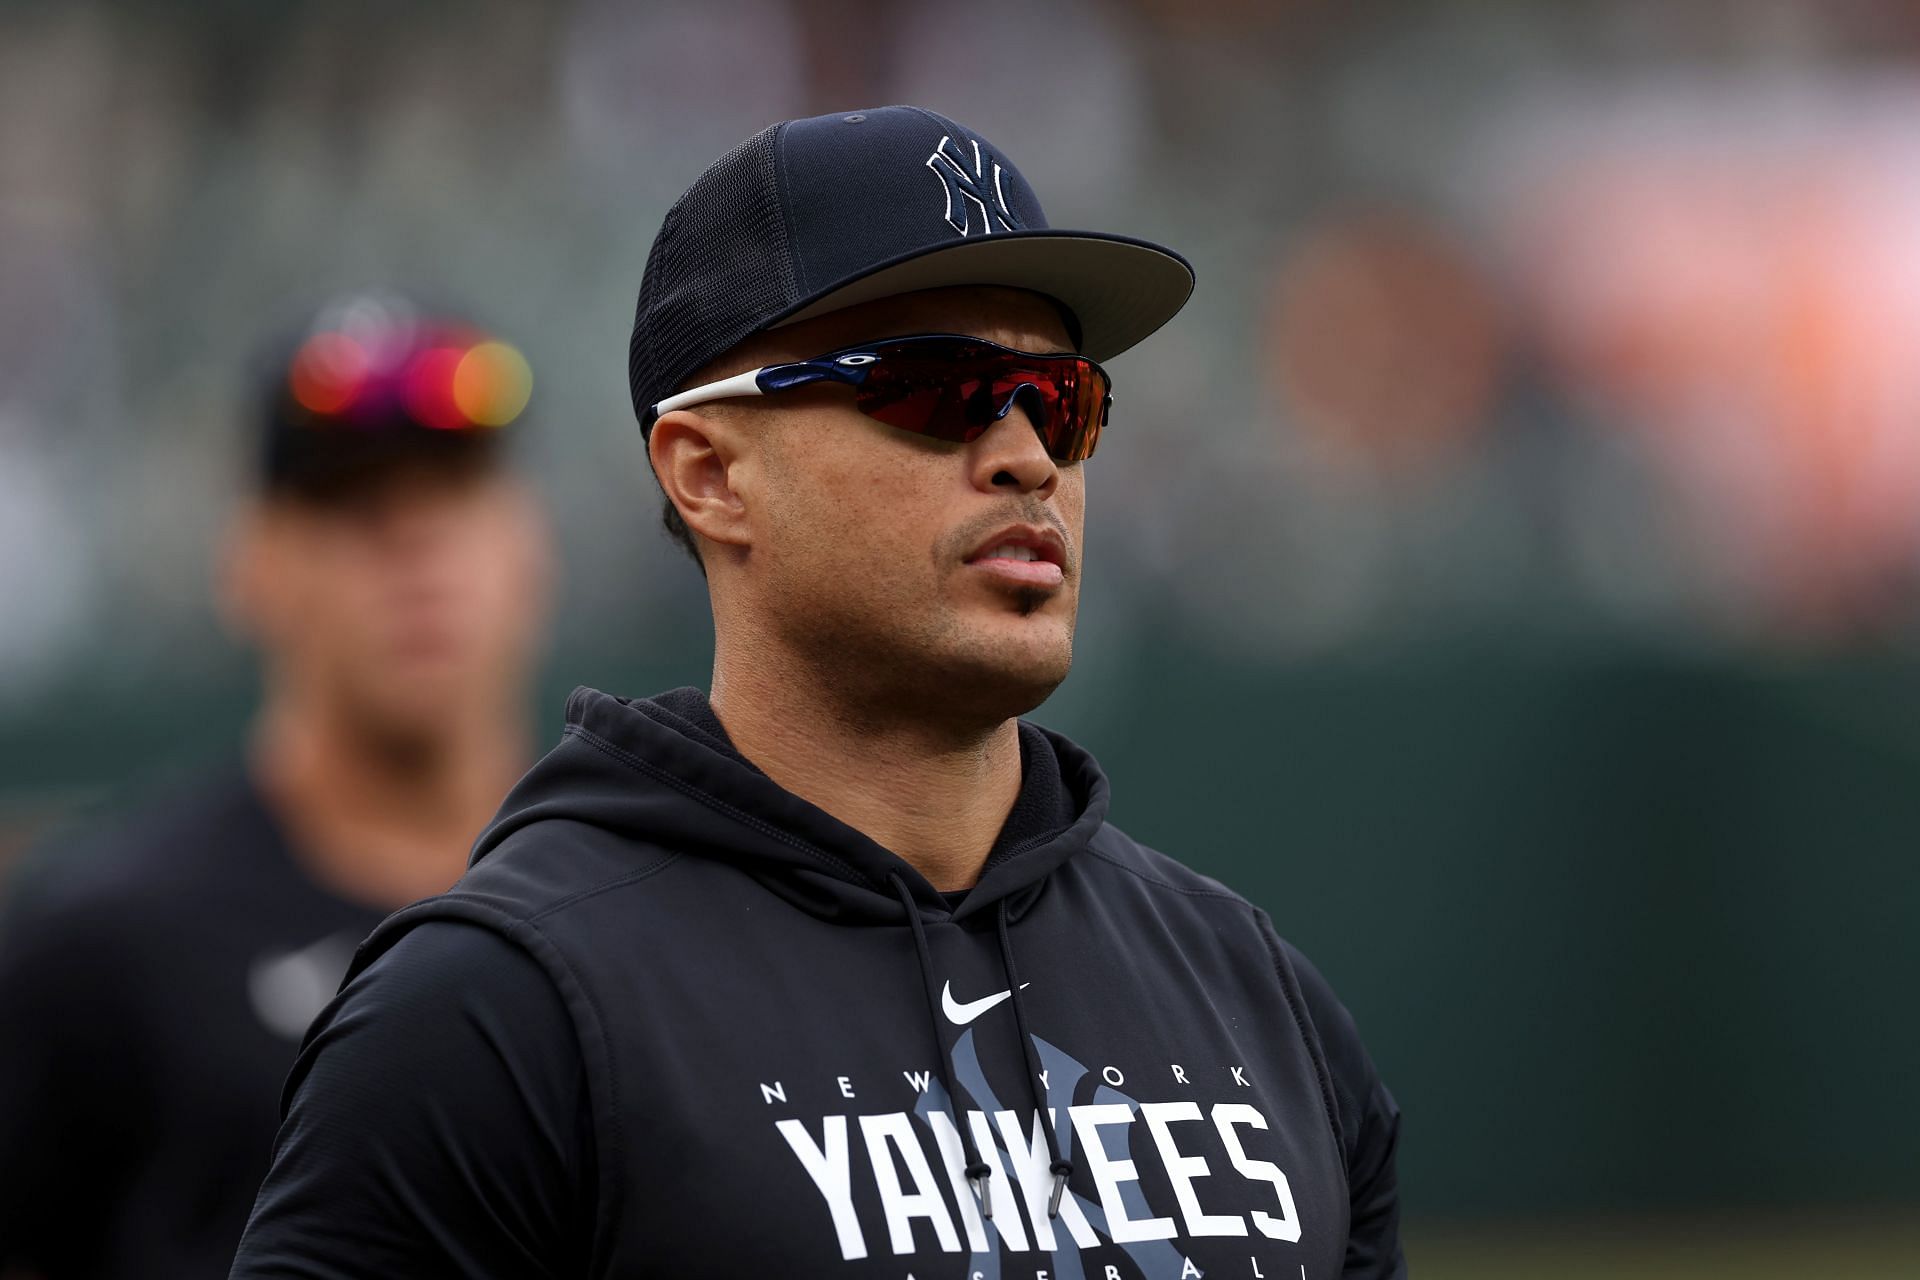 Yankees' Giancarlo Stanton on injuries: 'It's unacceptable this